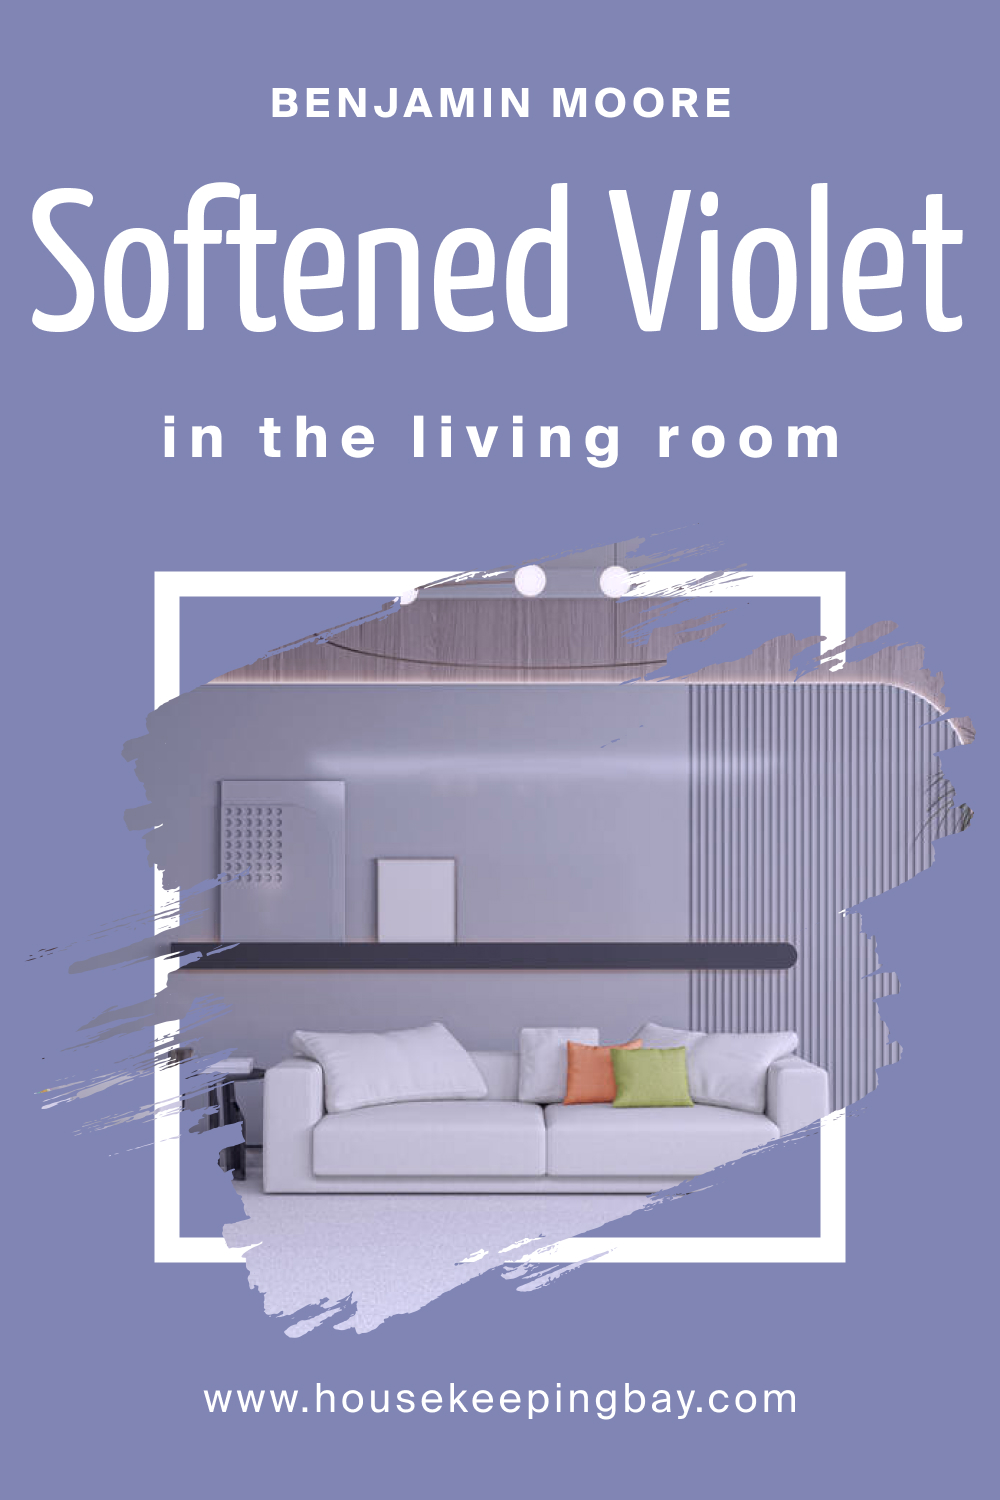 How to Use BM Softened Violet 1420 in the Living Room?